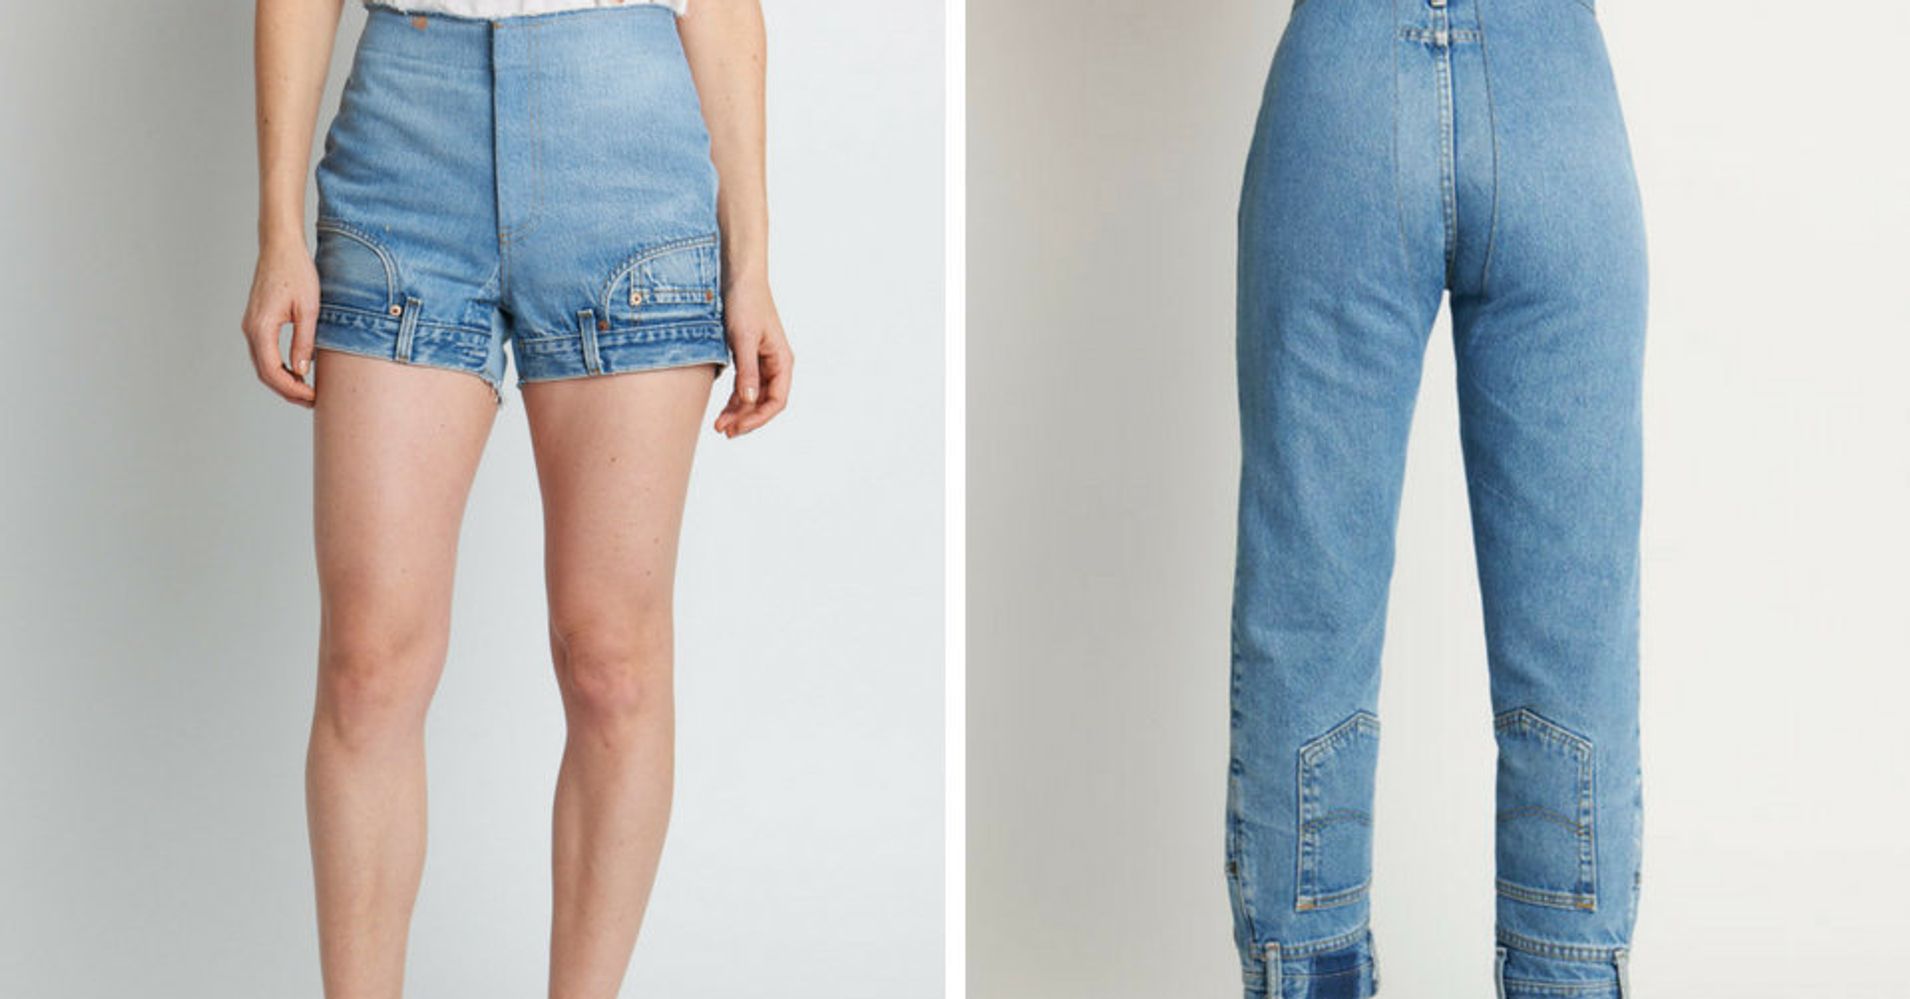 So, Now There Are Upside-Down Jeans No One Asked For | HuffPost Life